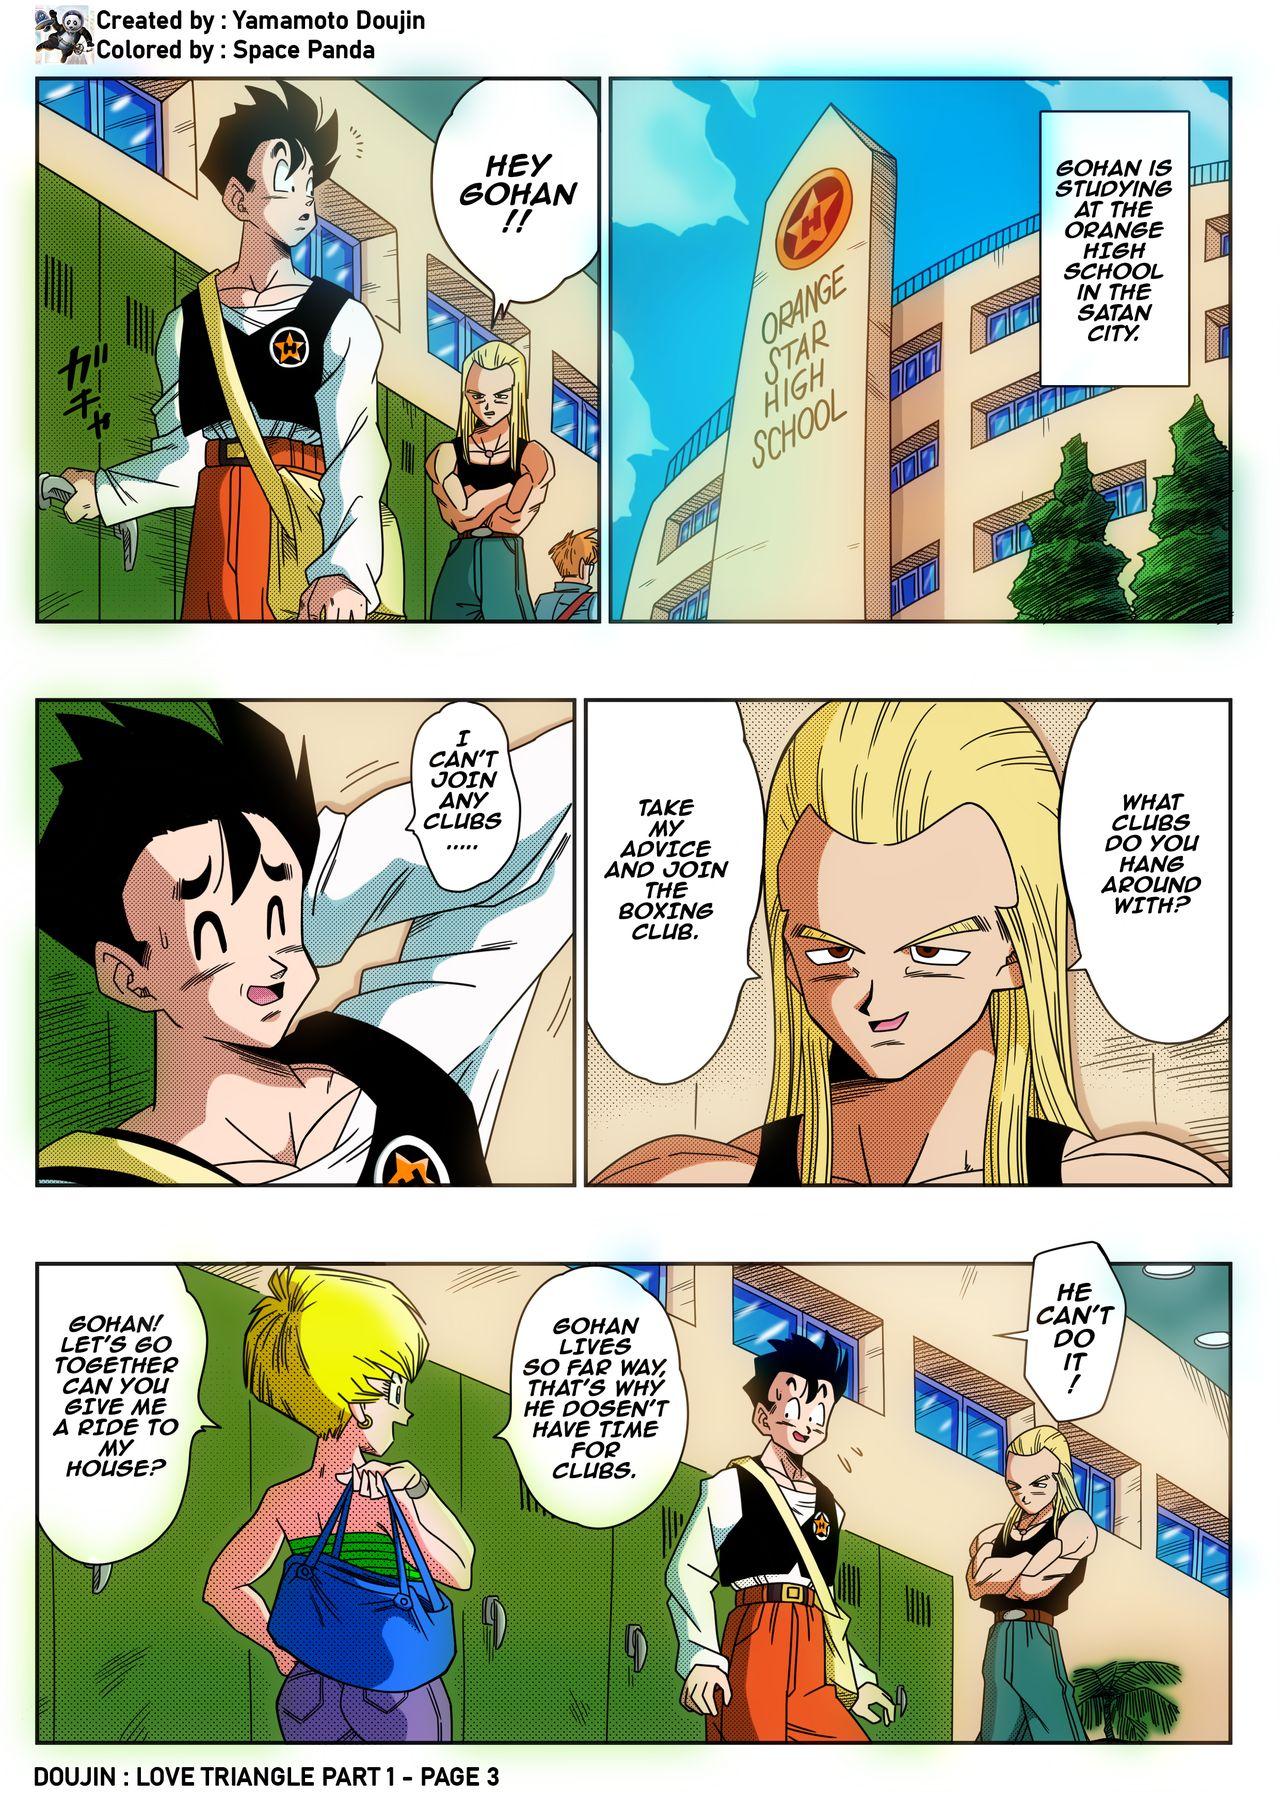 Chacal Love Triangle - Part 1 - Dragon ball z Gay Pissing - Page 3